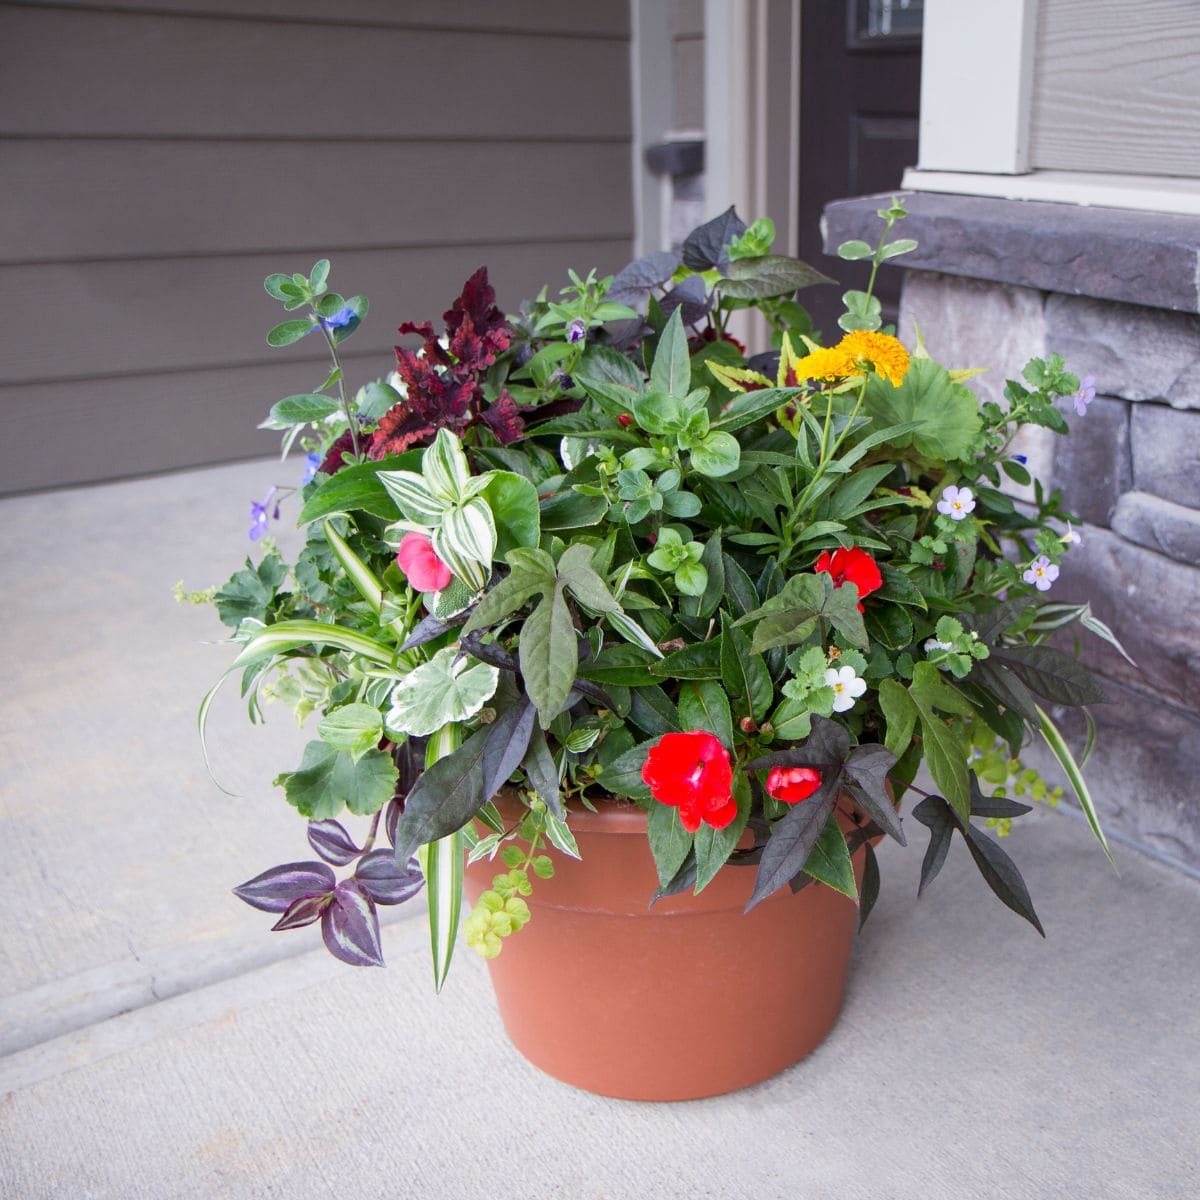 Small Porch Decor Ideas to Add Curb Appeal